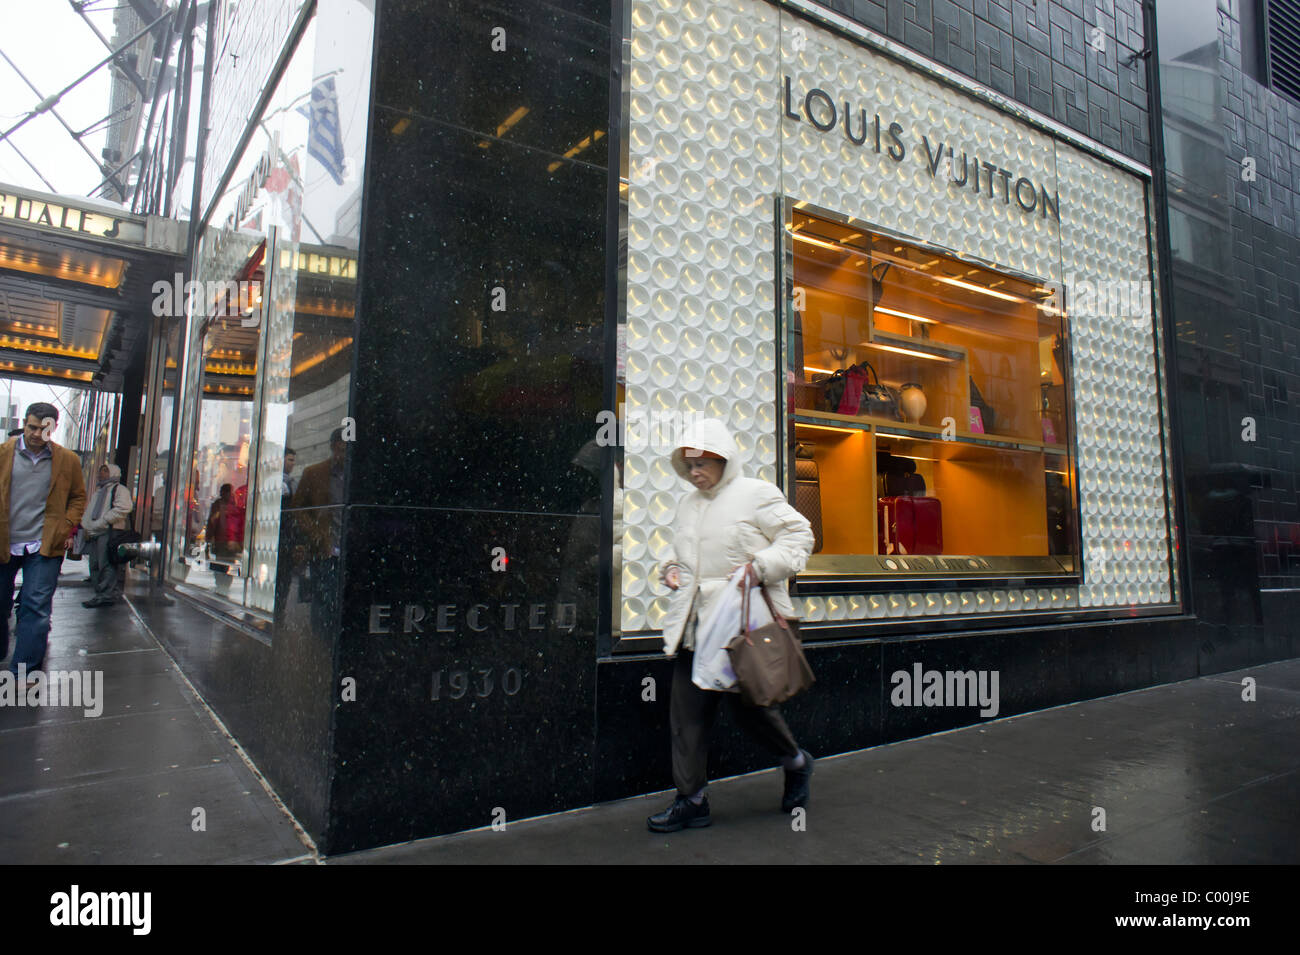 Bloomingdale&#39;s department store promotes Louis Vuitton merchandise Stock Photo, Royalty Free ...